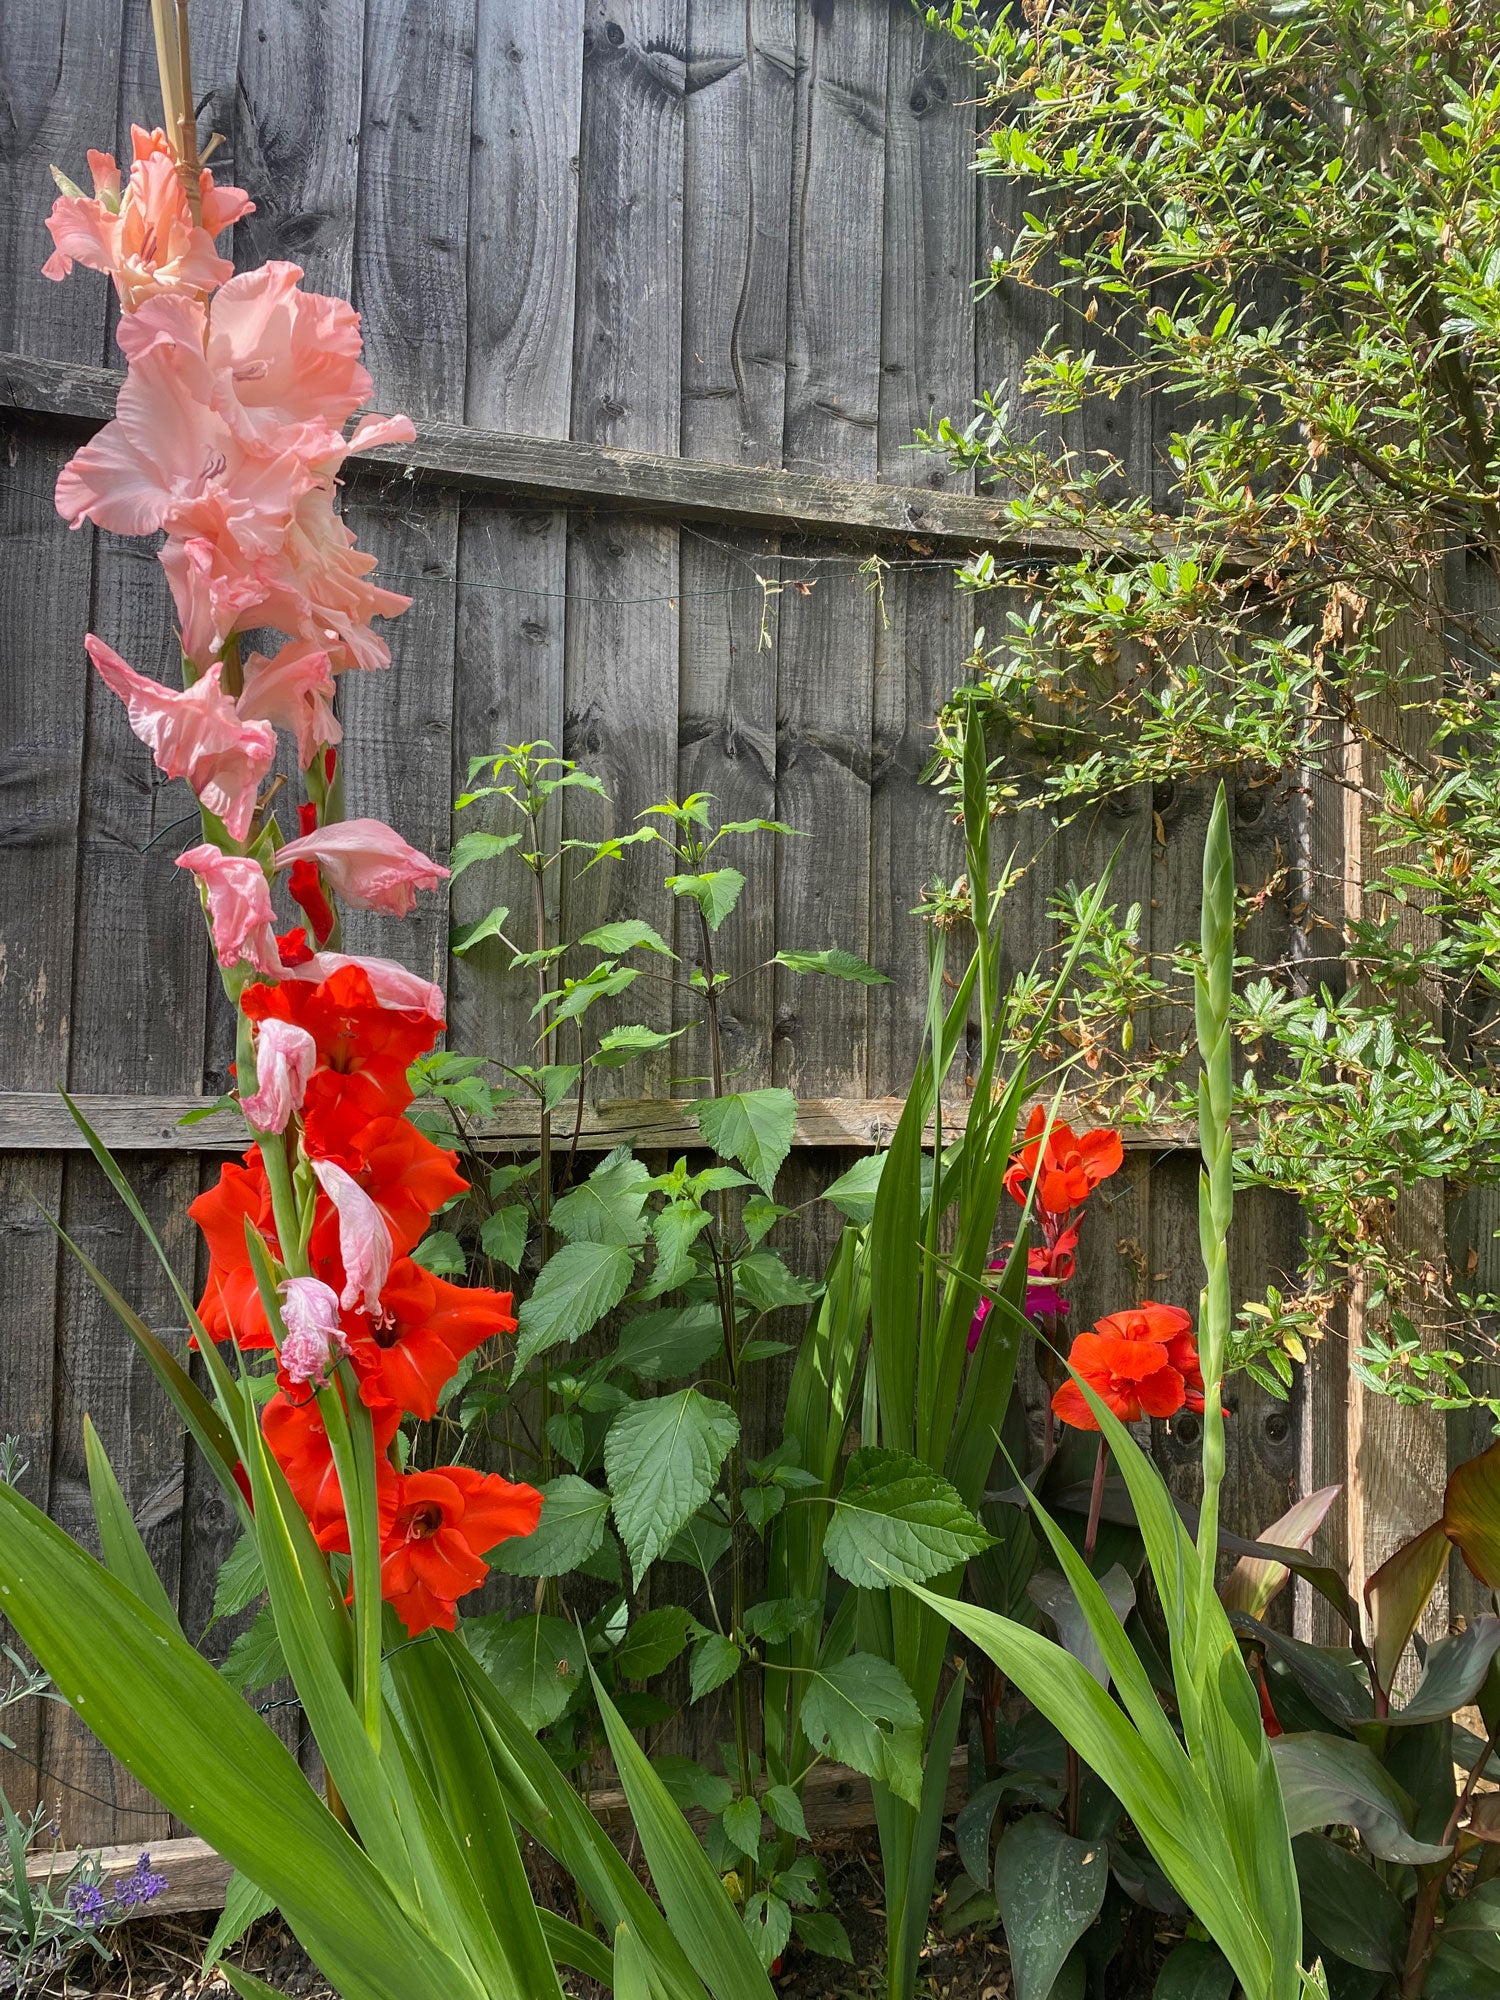 Pink and red gladiolus with salvia leeves in the background against a wooden fence.